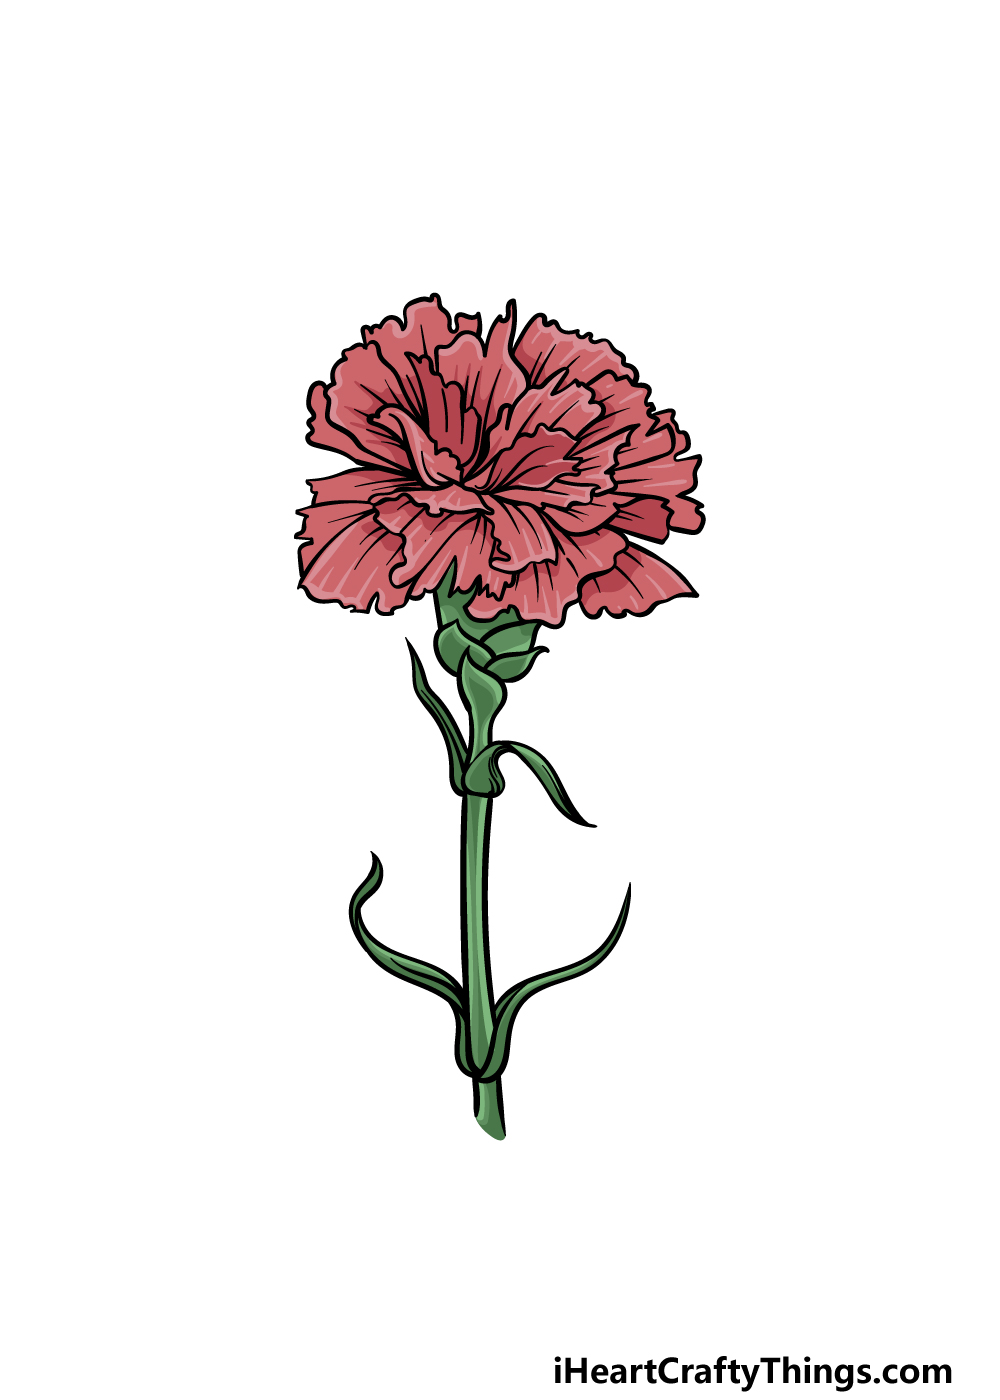 Carnation Drawing - How To Draw A Carnation Step By Step